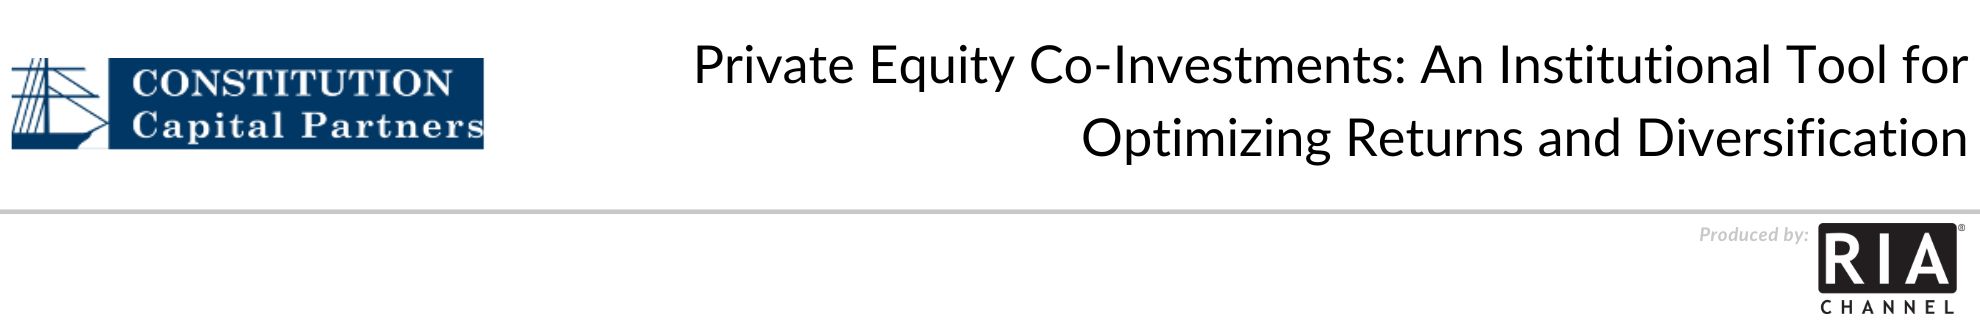 Private Equity Co-Investments: An Institutional Tool for Optimizing Returns and Diversification